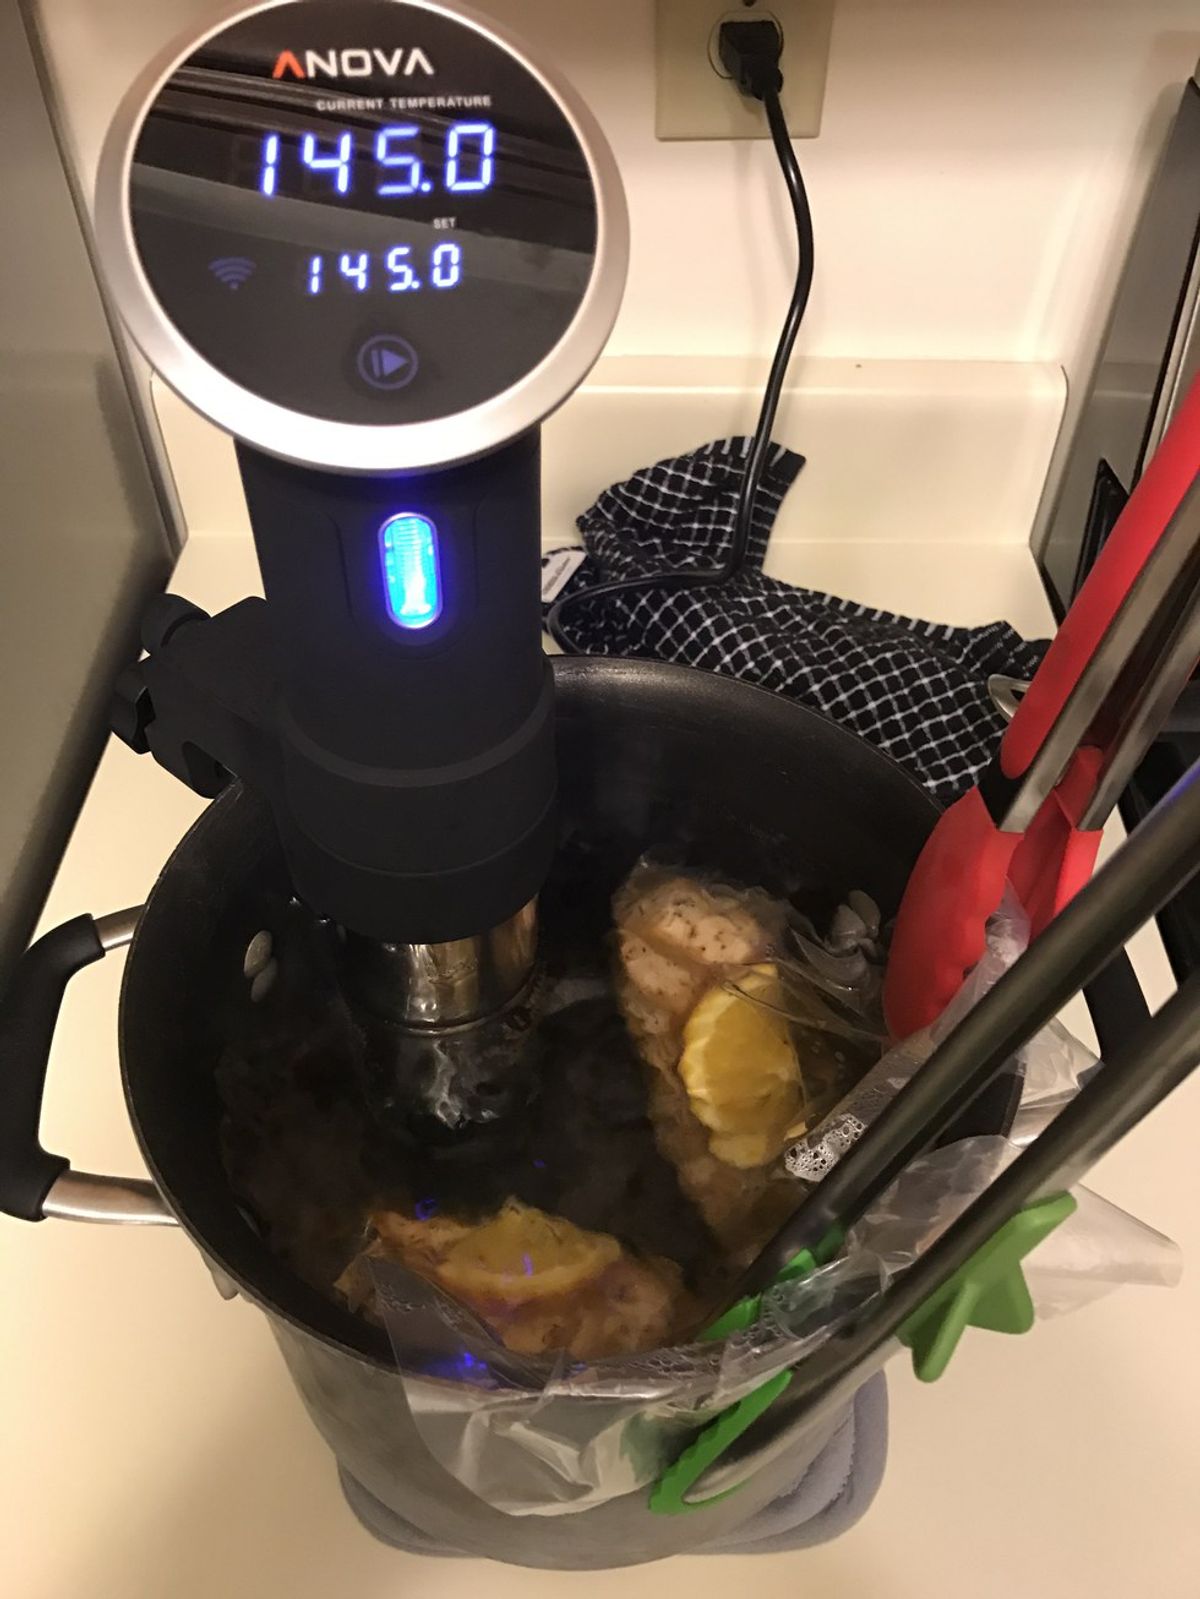 To Sous Vide, or Not Sous Vide - Should You Buy One?